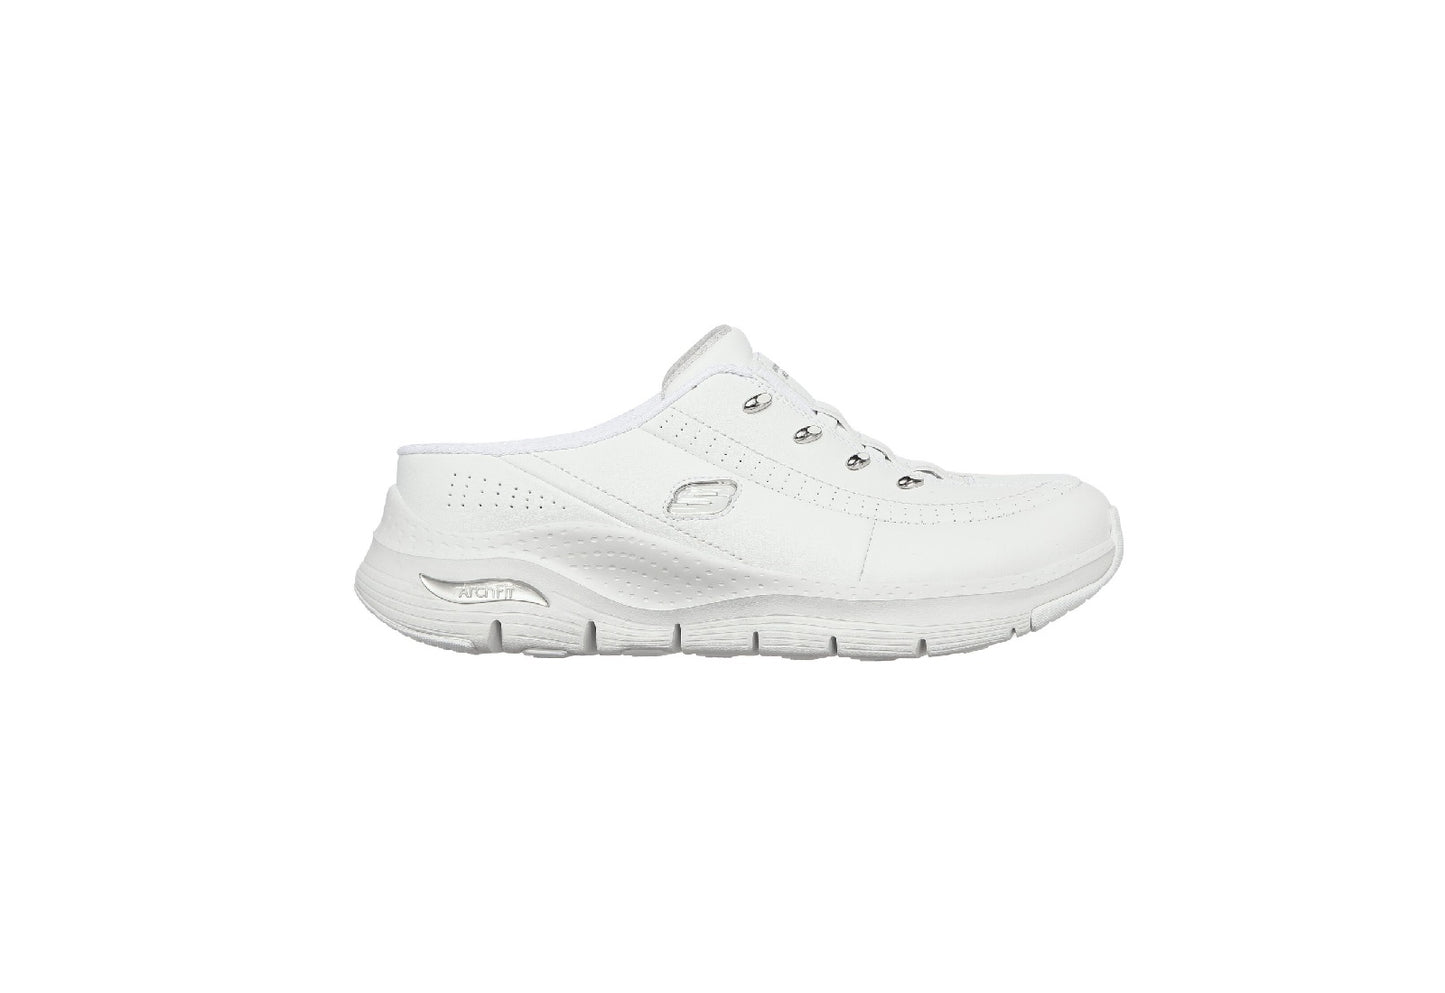 Skechers Women's Arch Fit - Blessful Me, White/Silver